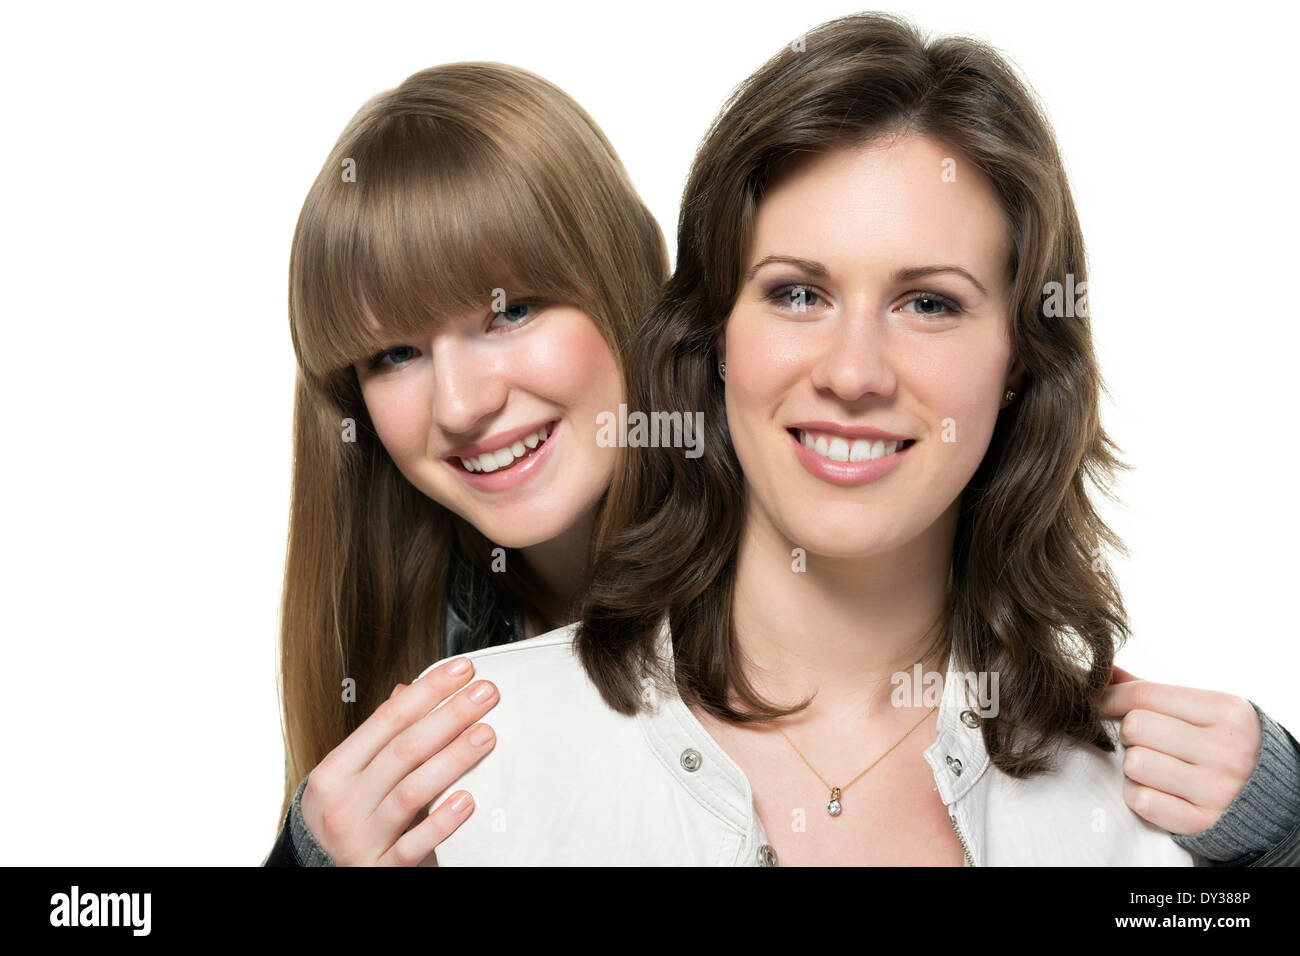 Portrait of two happy woman, blond and brunette, with black and white leather jacket, isolated on white background Stock Photo